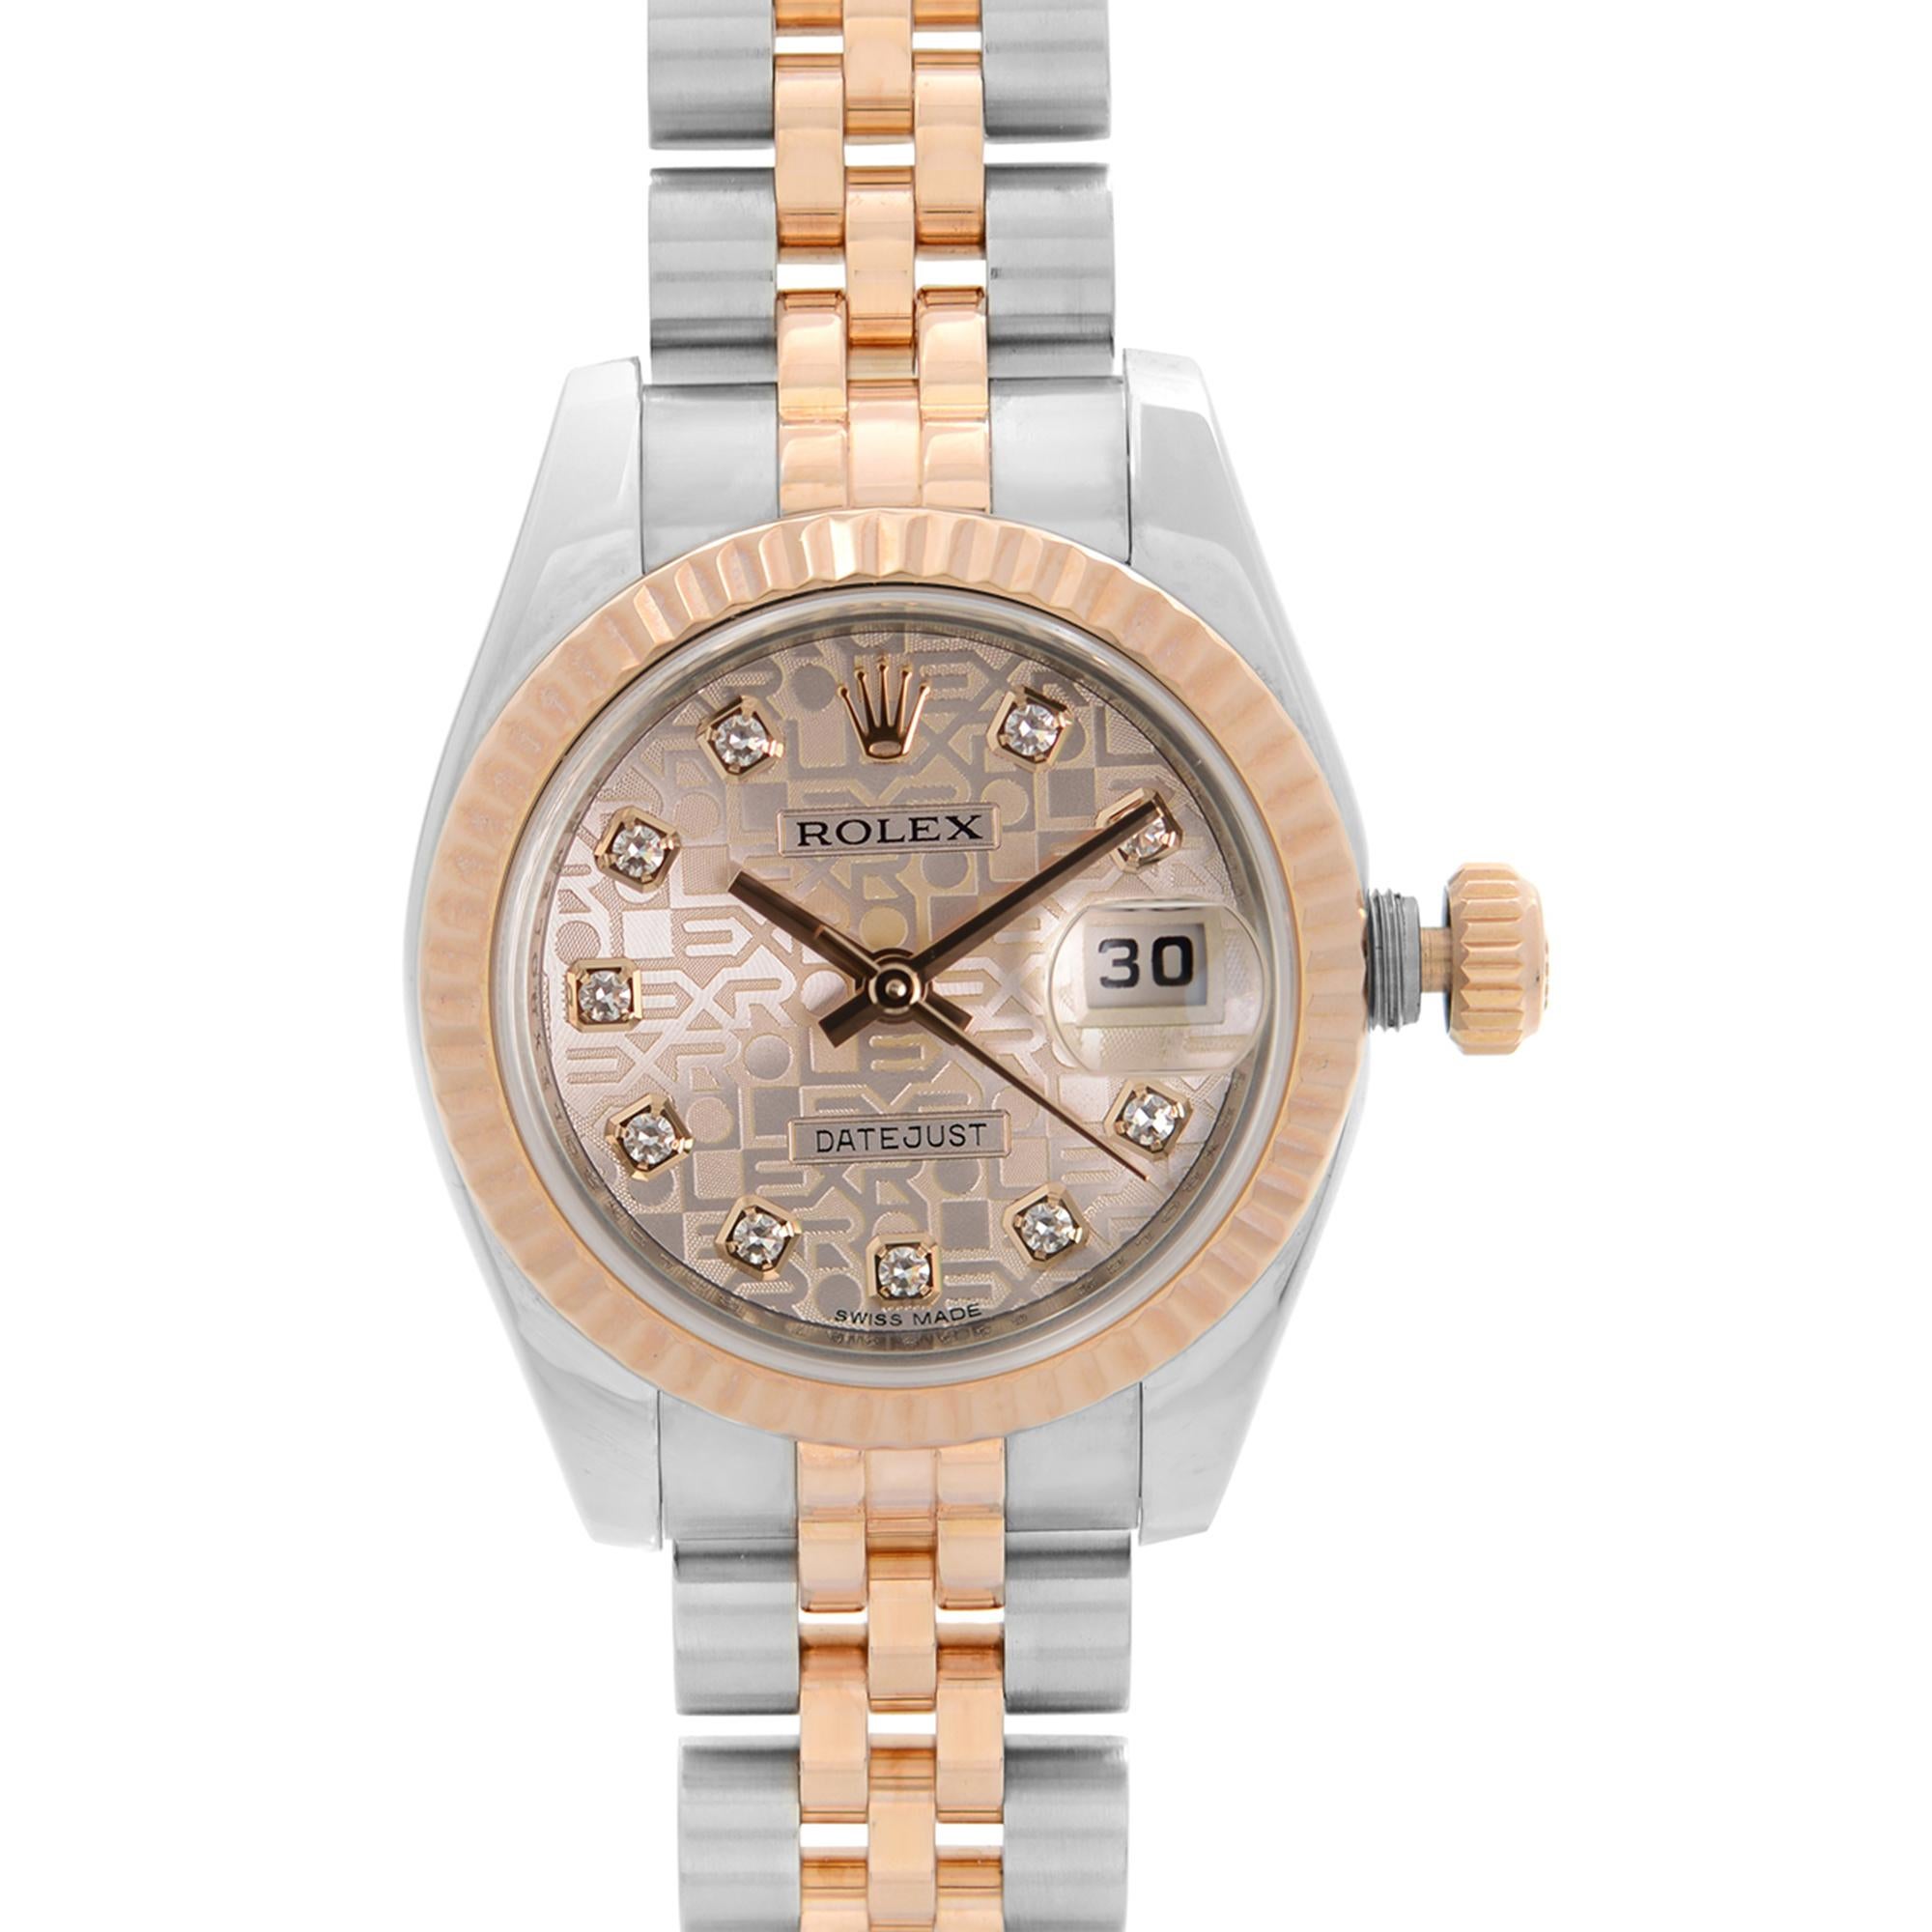 Pre Owned Rolex Datejust 26mm 18k Rose Gold Steel Diamond Dial Ladies Watch 179171. This Beautiful Timepiece is Powered by Mechanical (Automatic) Movement And Features: Round Stainless Steel Case with a Steel & Rose Gold Jubilee Bracelet, Fixed Rose